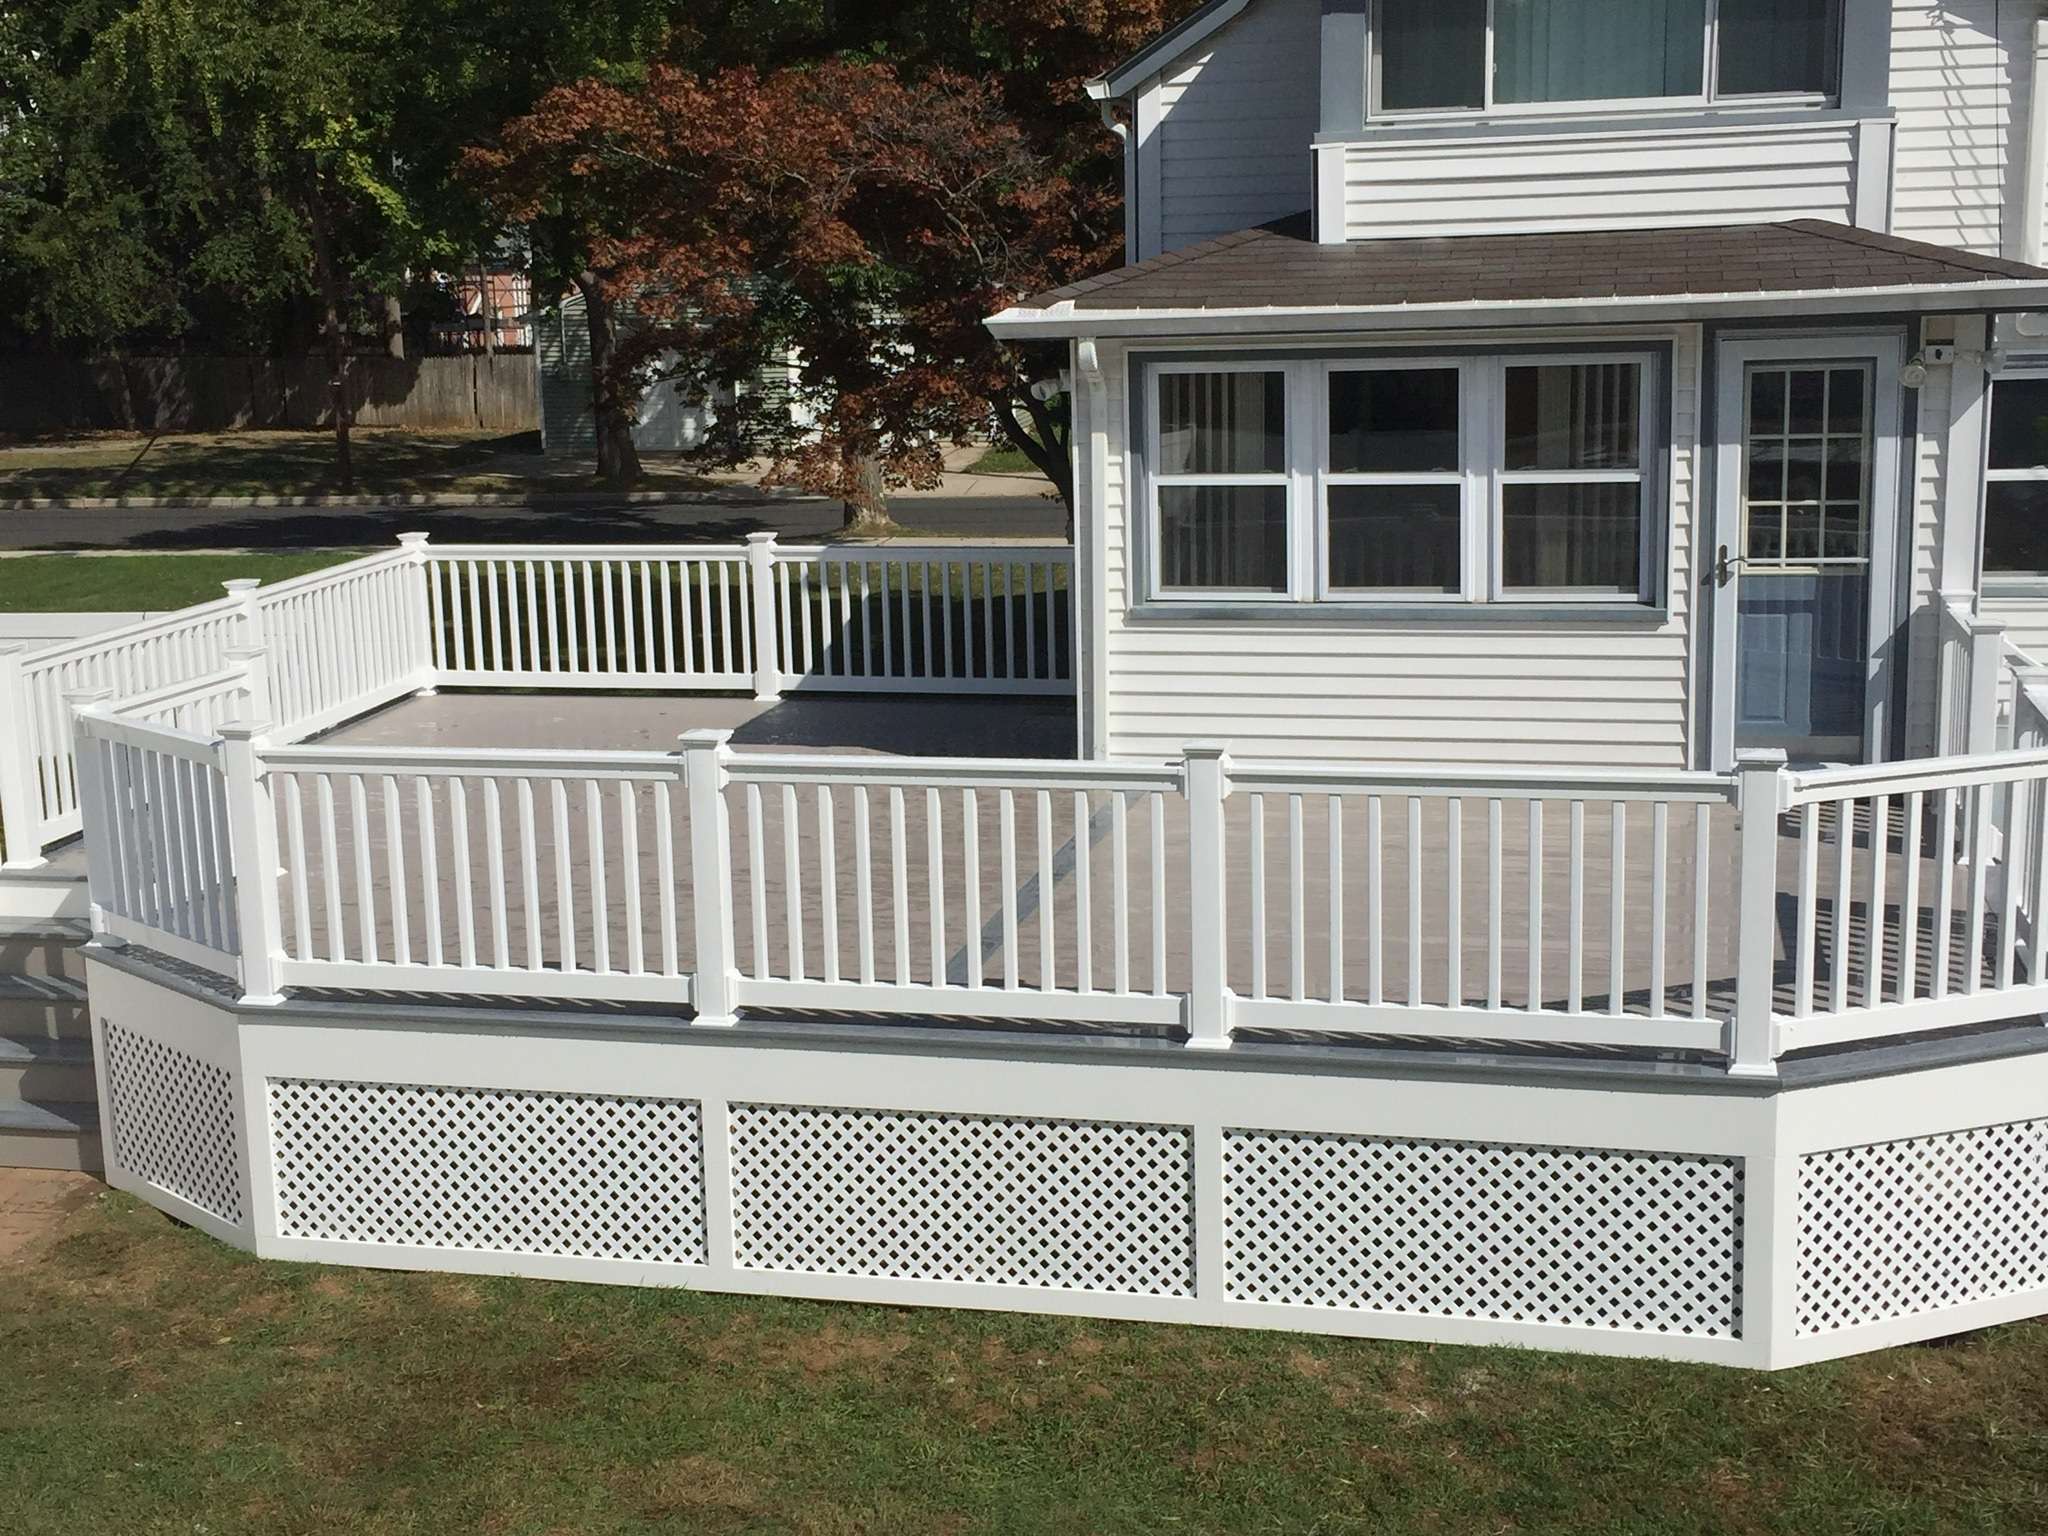 Two-Toned Deck With White Vinyl Railing and Lattice Facing